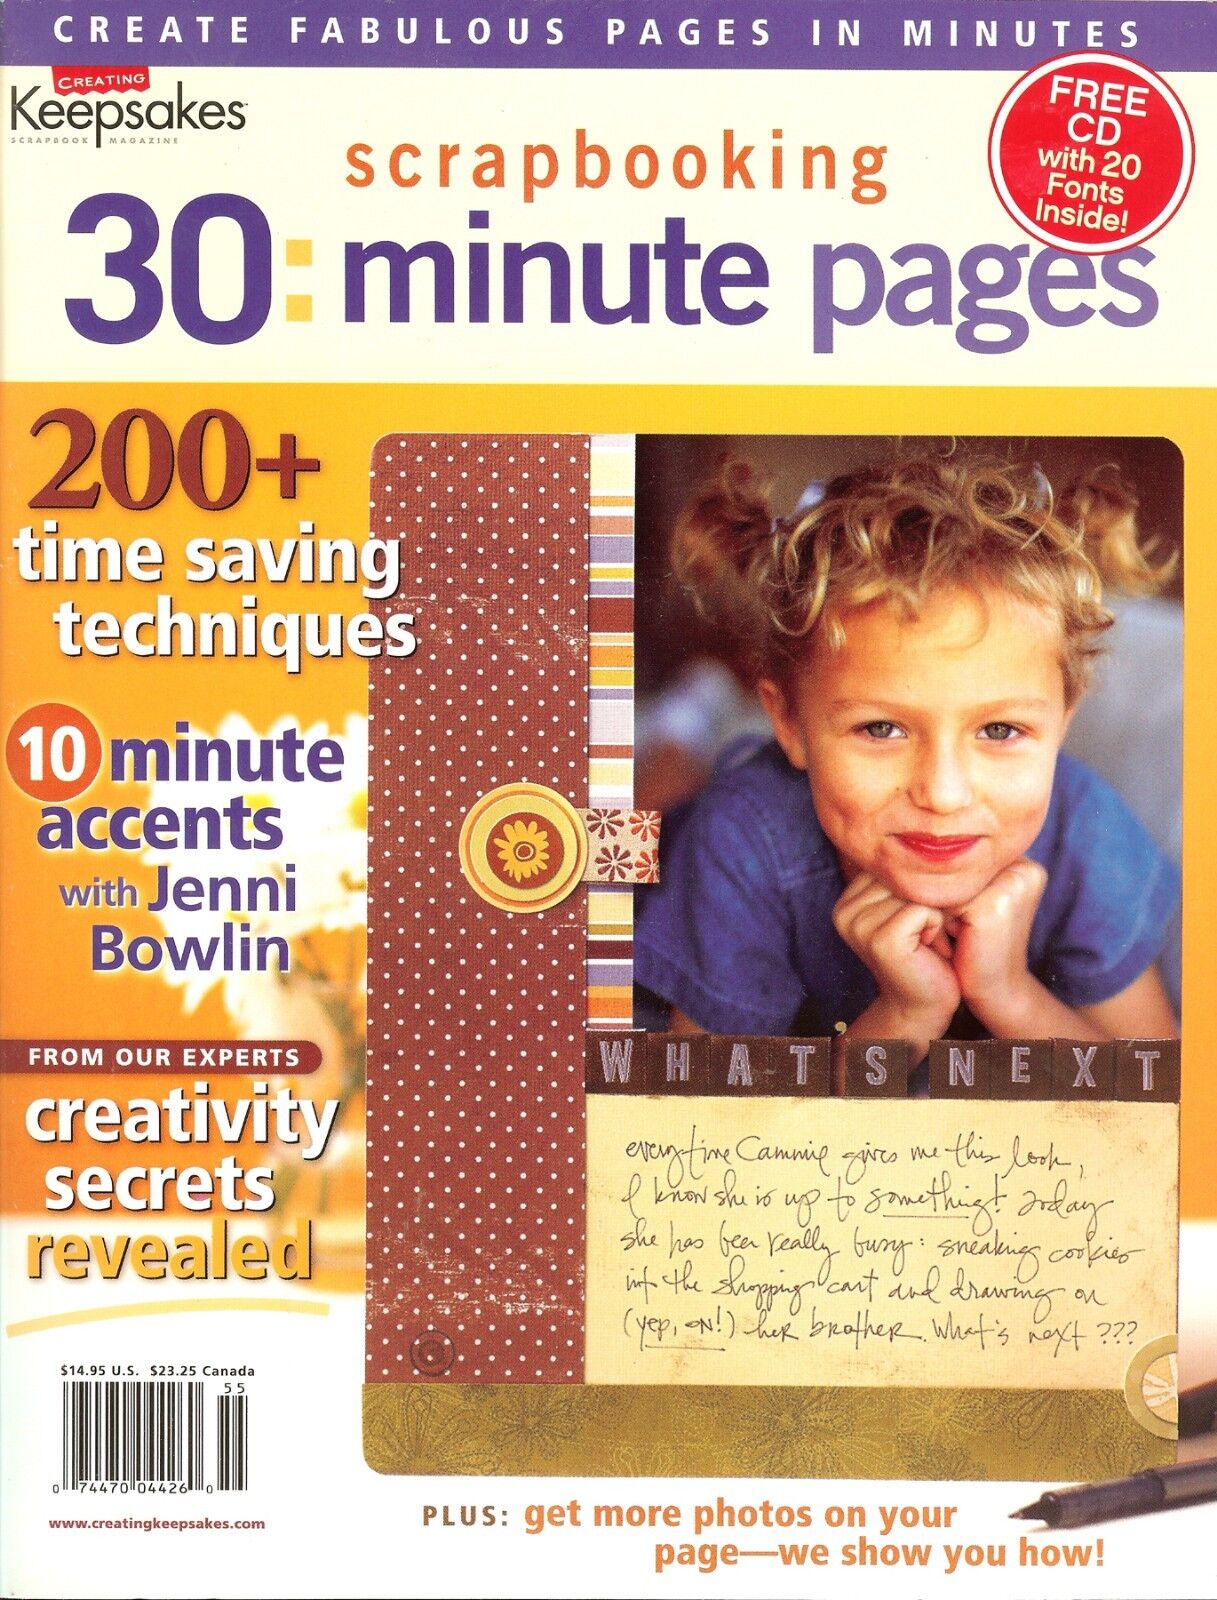 Creating Keepsakes - 30: Minute Scrapbooking Pages Idea Magazine, Font Cd Inside